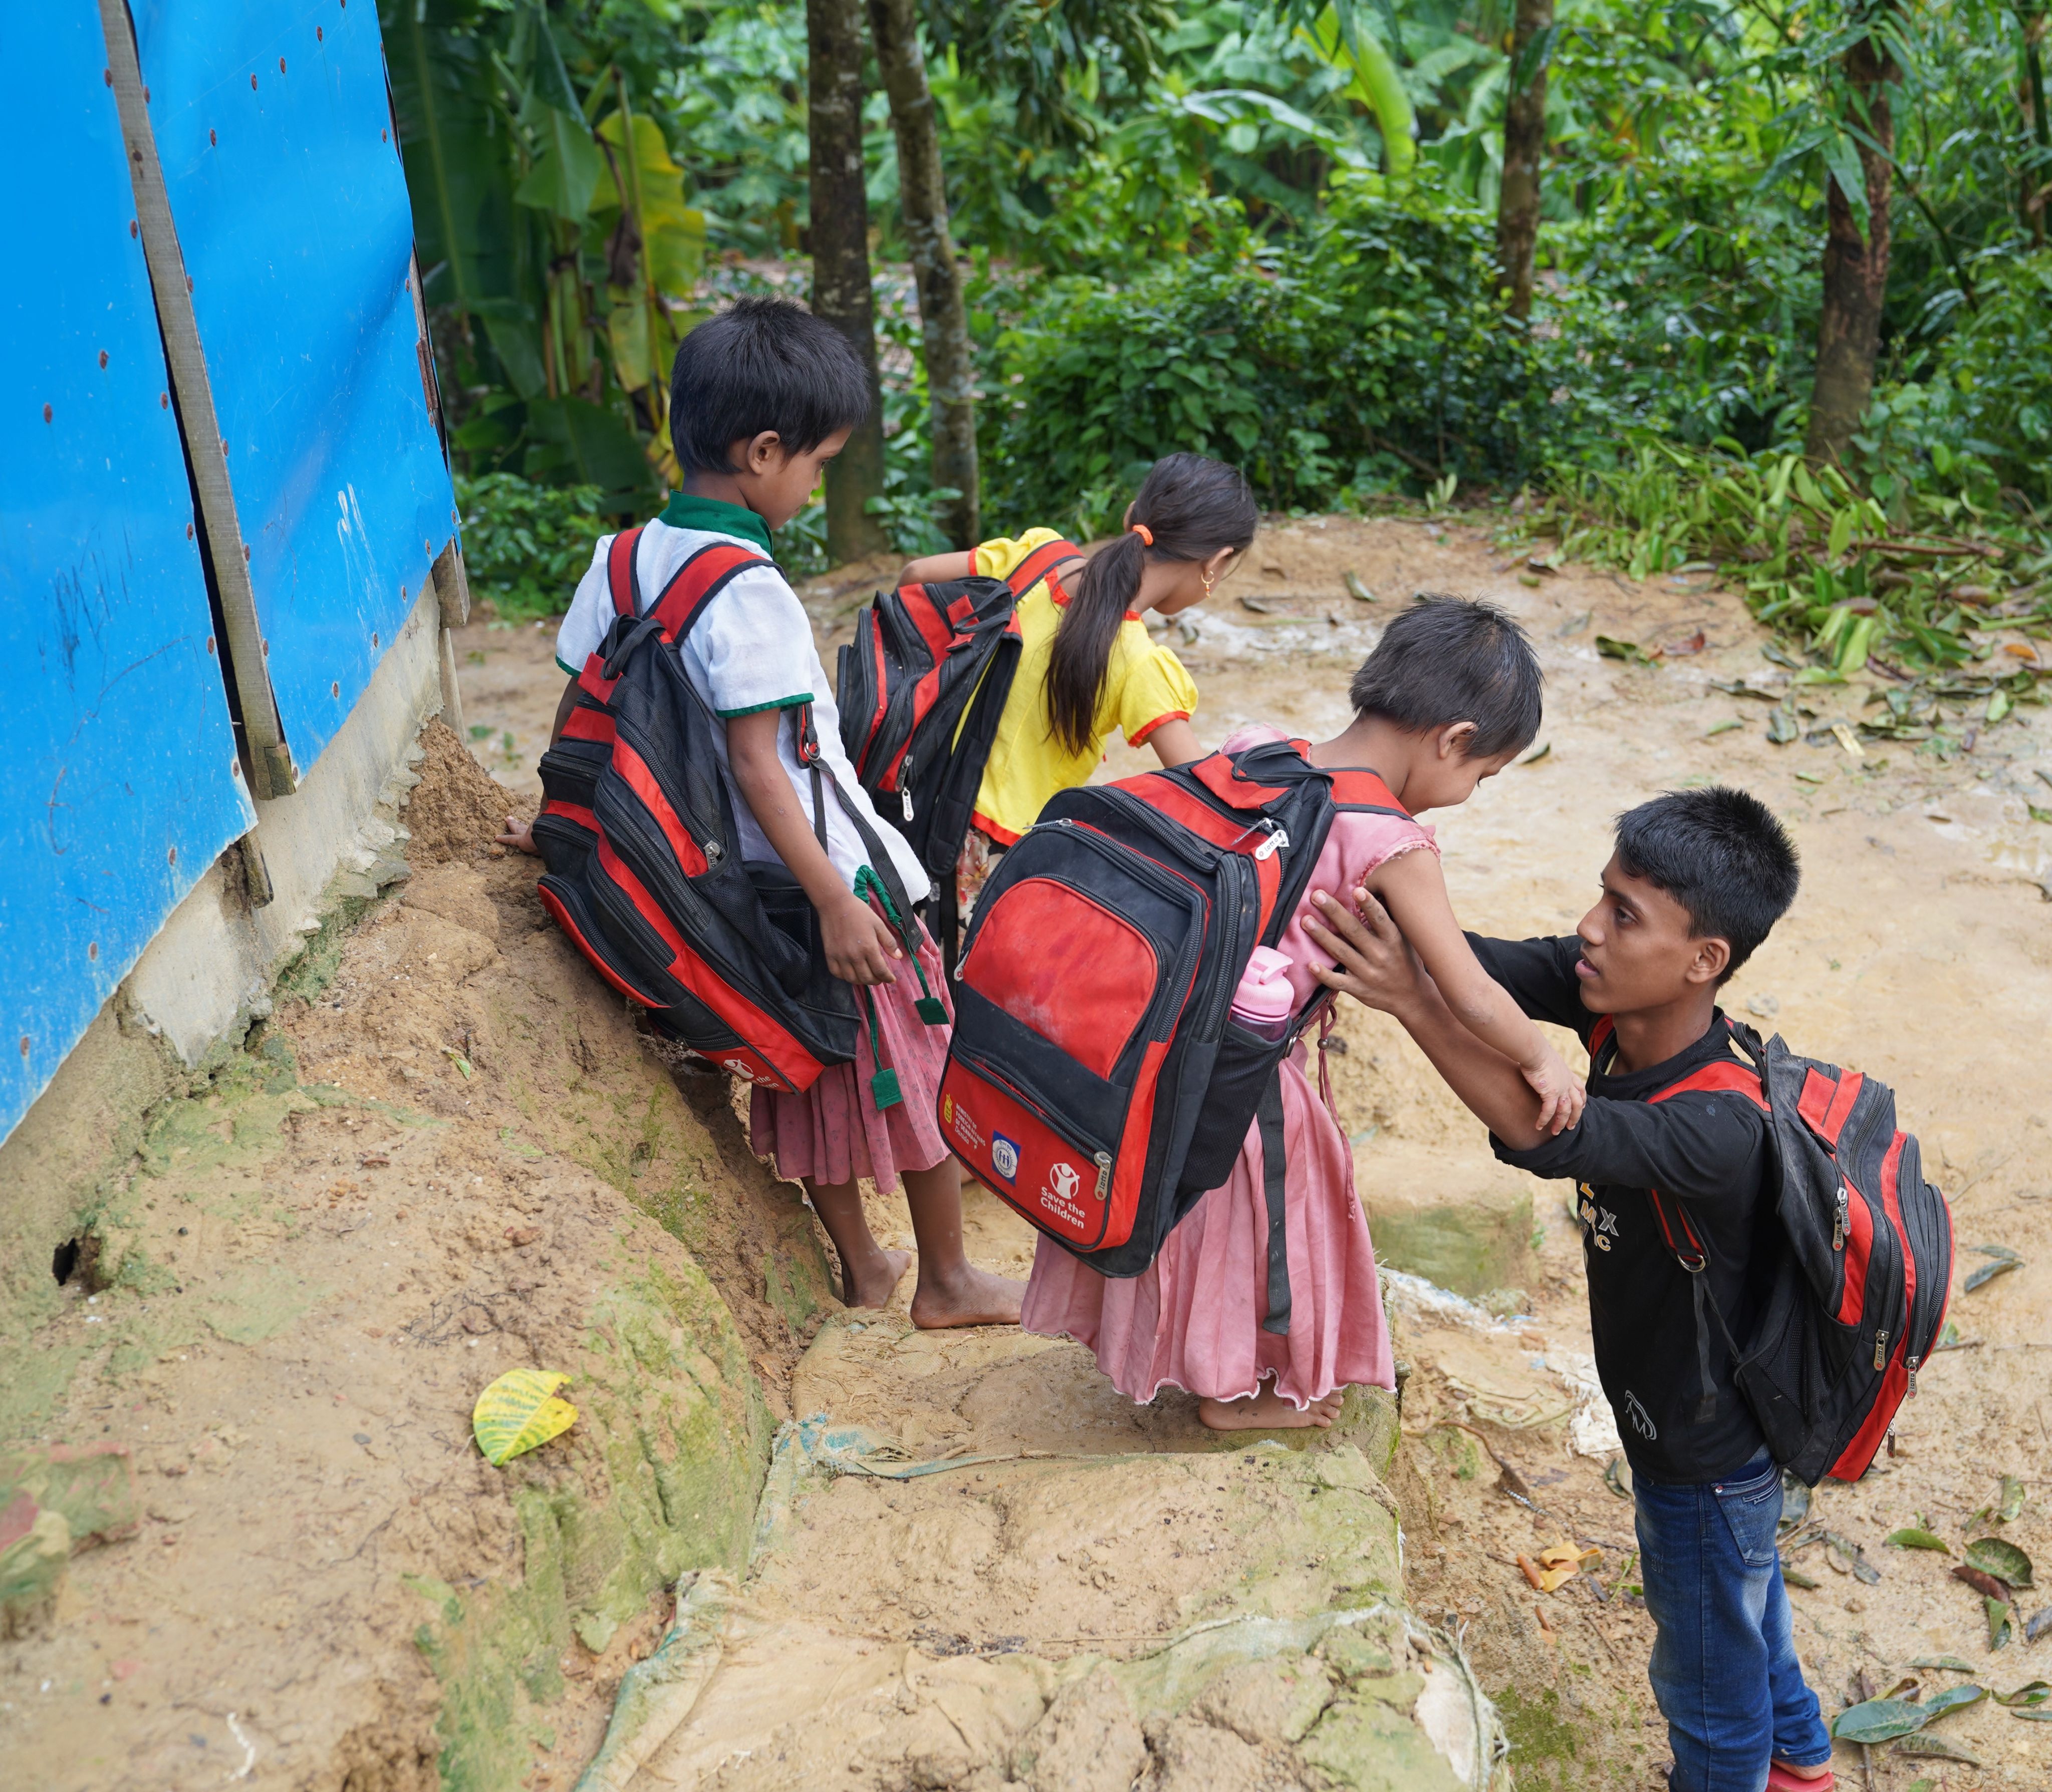 Ayaz*, 15, and his younger siblings en route to a Save the Children supported Learning Centre in Cox's Bazar, Bangladesh